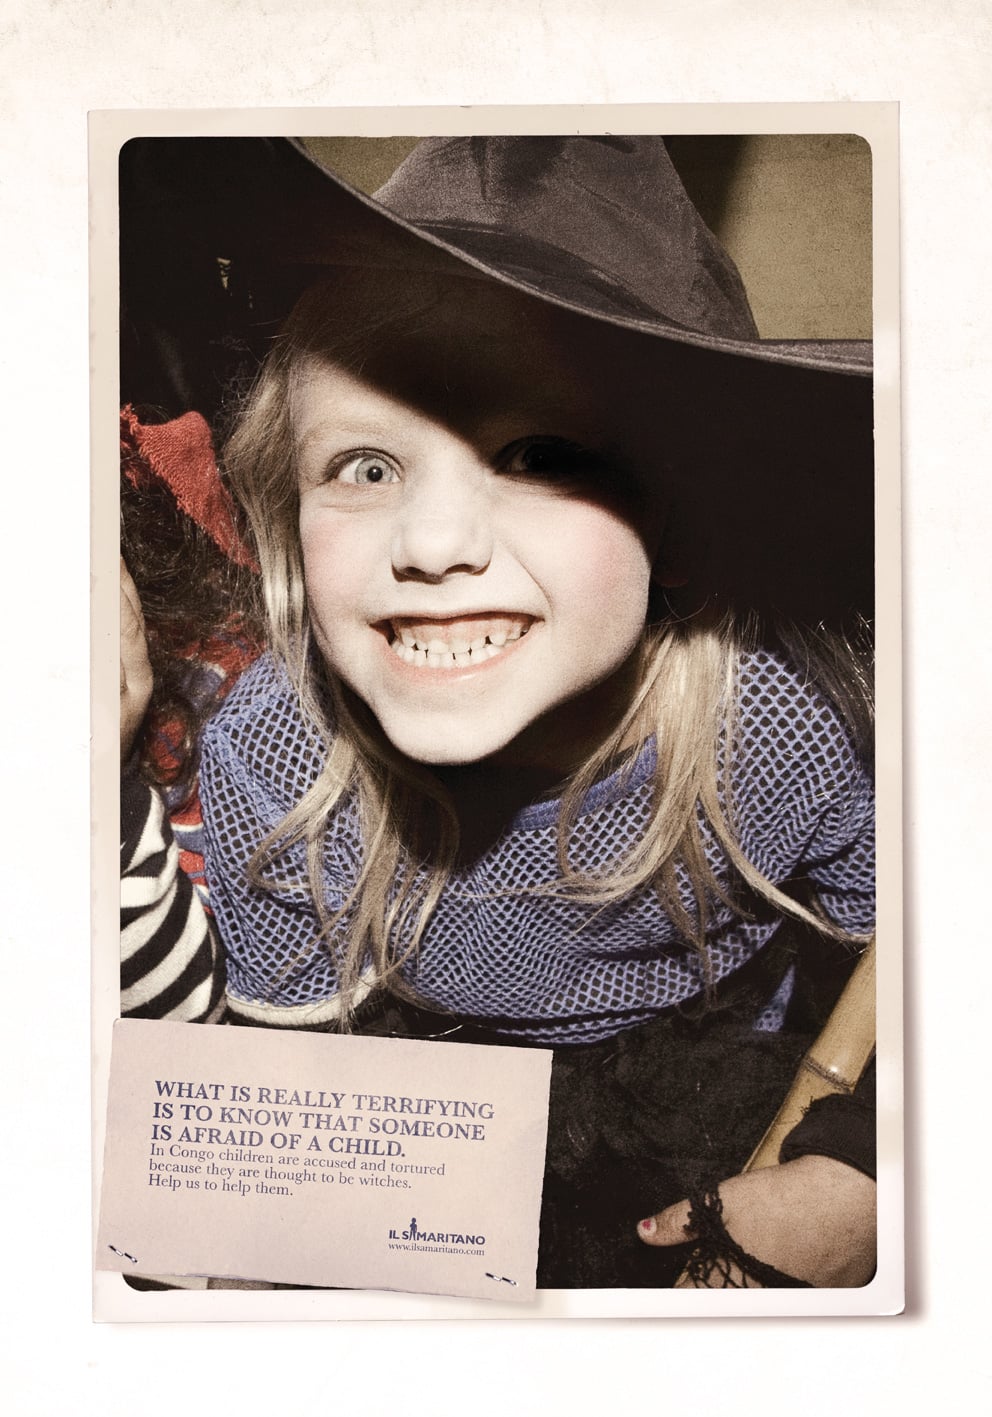 Trick-or-Treating: 36 Halloween Print Ads to Scare You